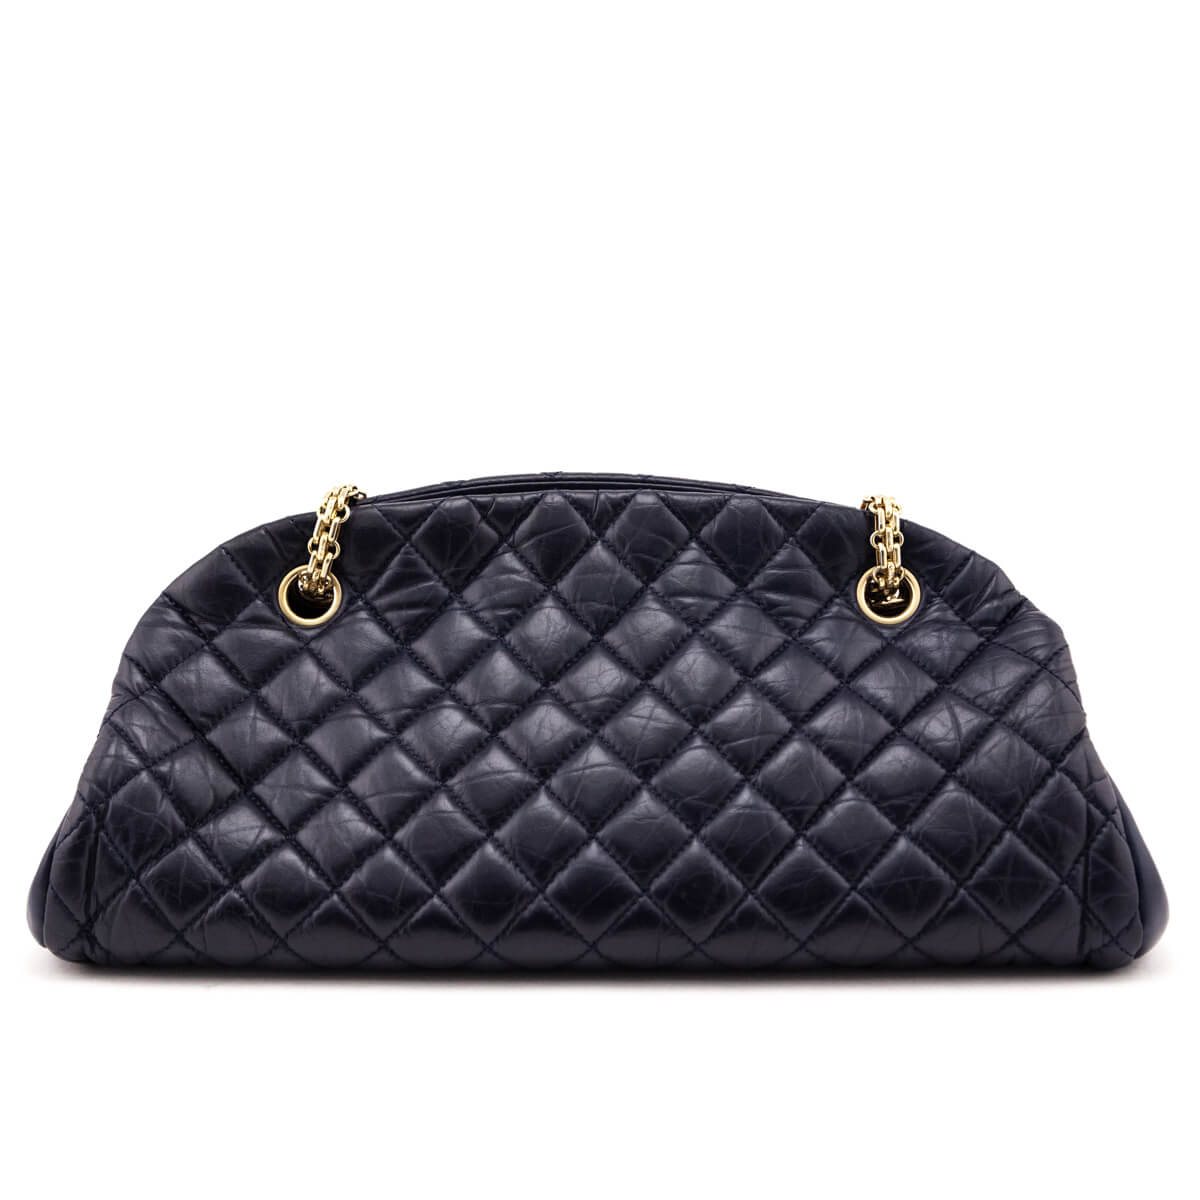 Chanel Navy Quilted Aged Calfskin Mademoiselle Bowler Bag - Love that Bag etc - Preowned Authentic Designer Handbags & Preloved Fashions